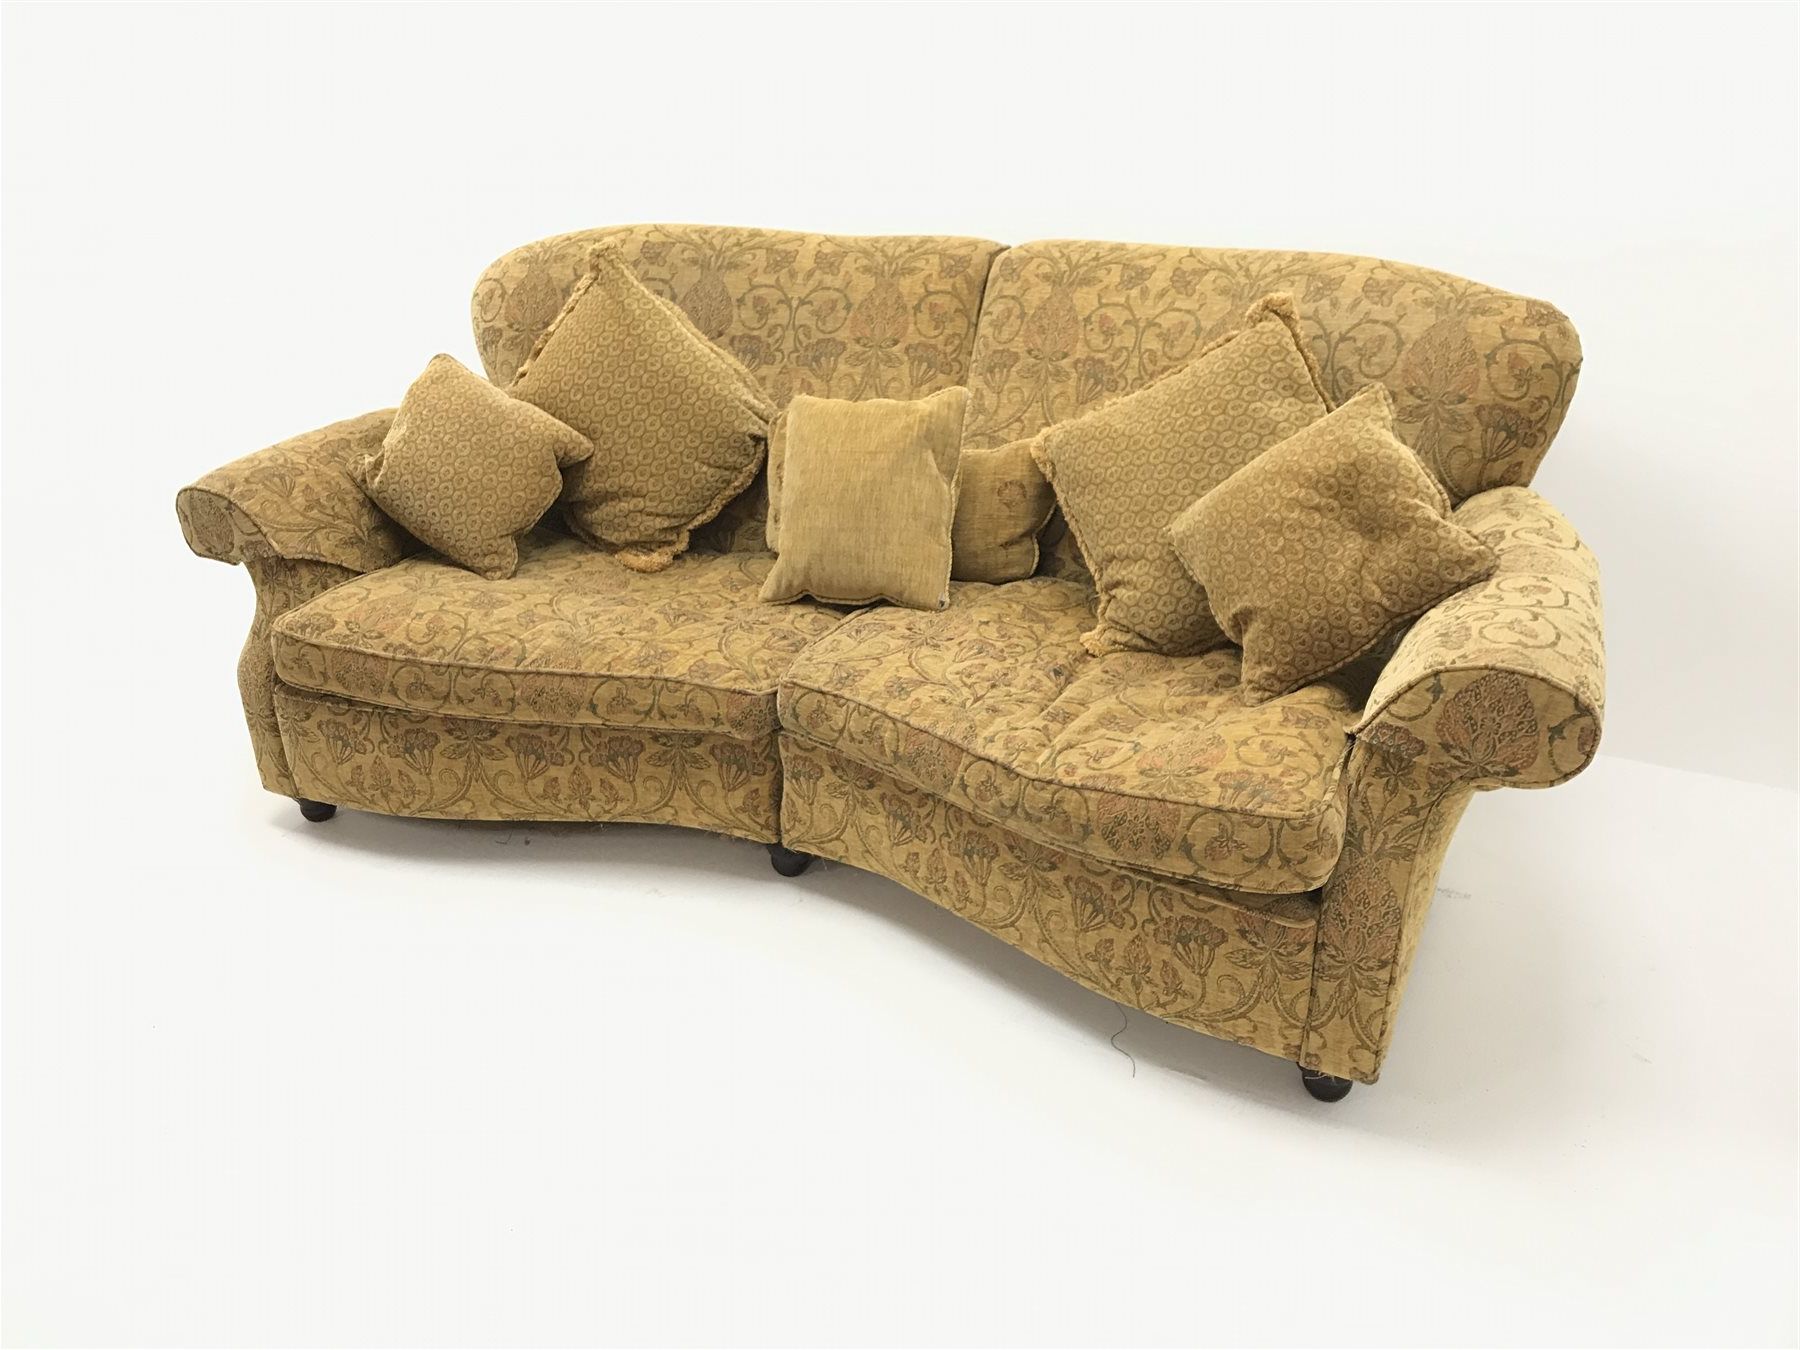 Three Seat Curved Traditional Sofa, Scrolled Arms, Upholstered In A Pertaining To Sofas With Curved Arms (View 6 of 20)